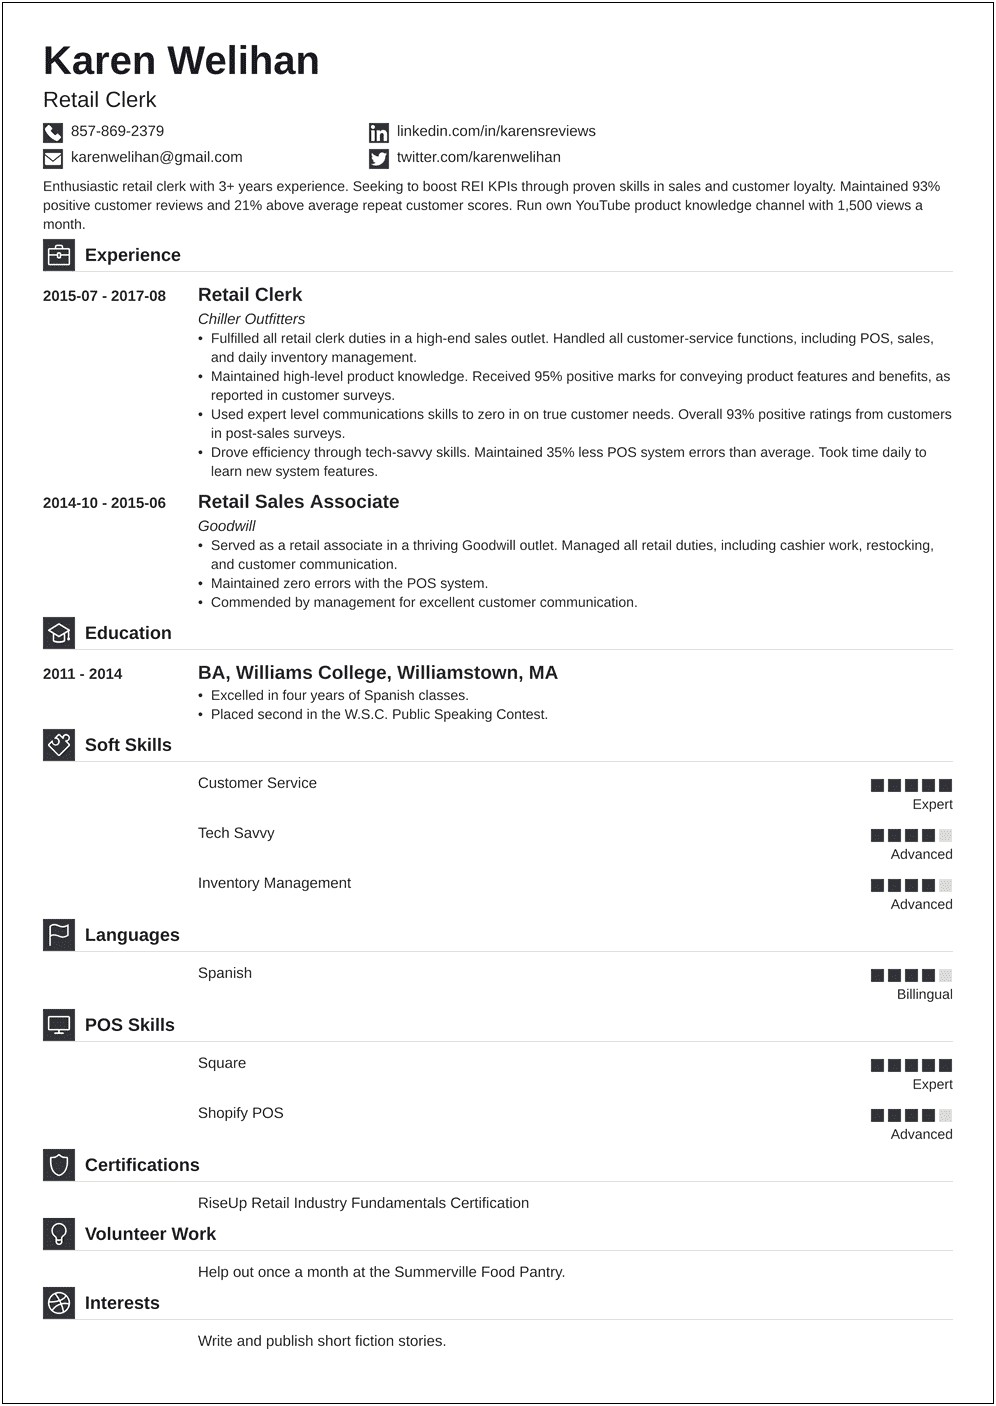 Does Retail Experience Look Good On A Resume